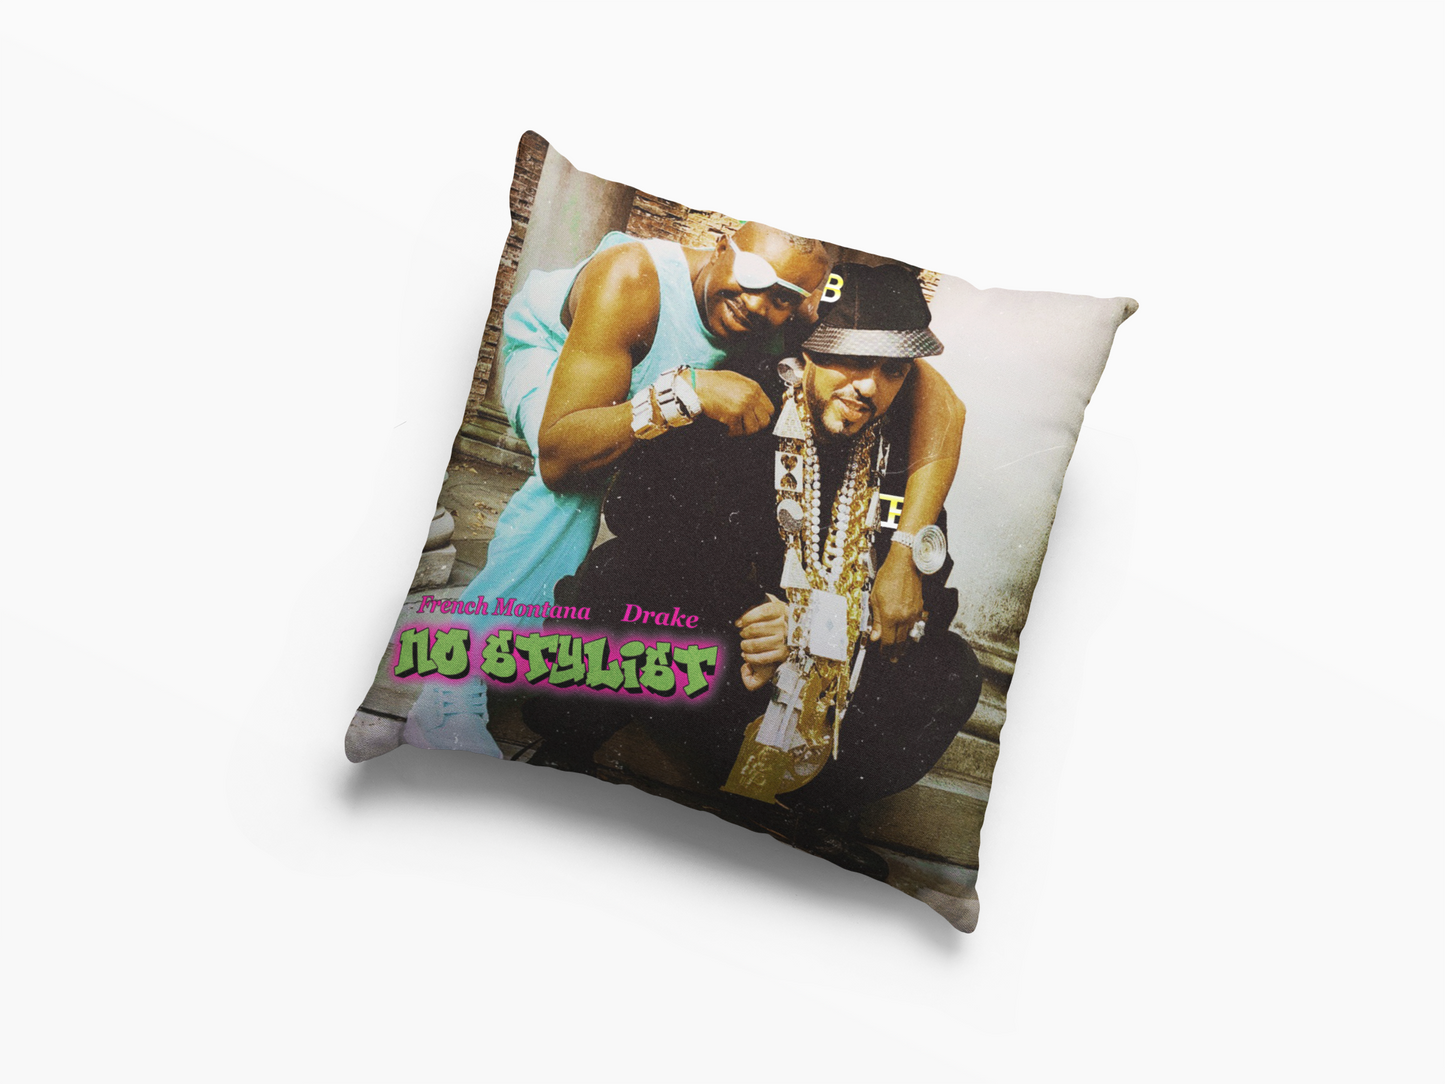 French Montana No Stylist Cushion Case / Pillow Case